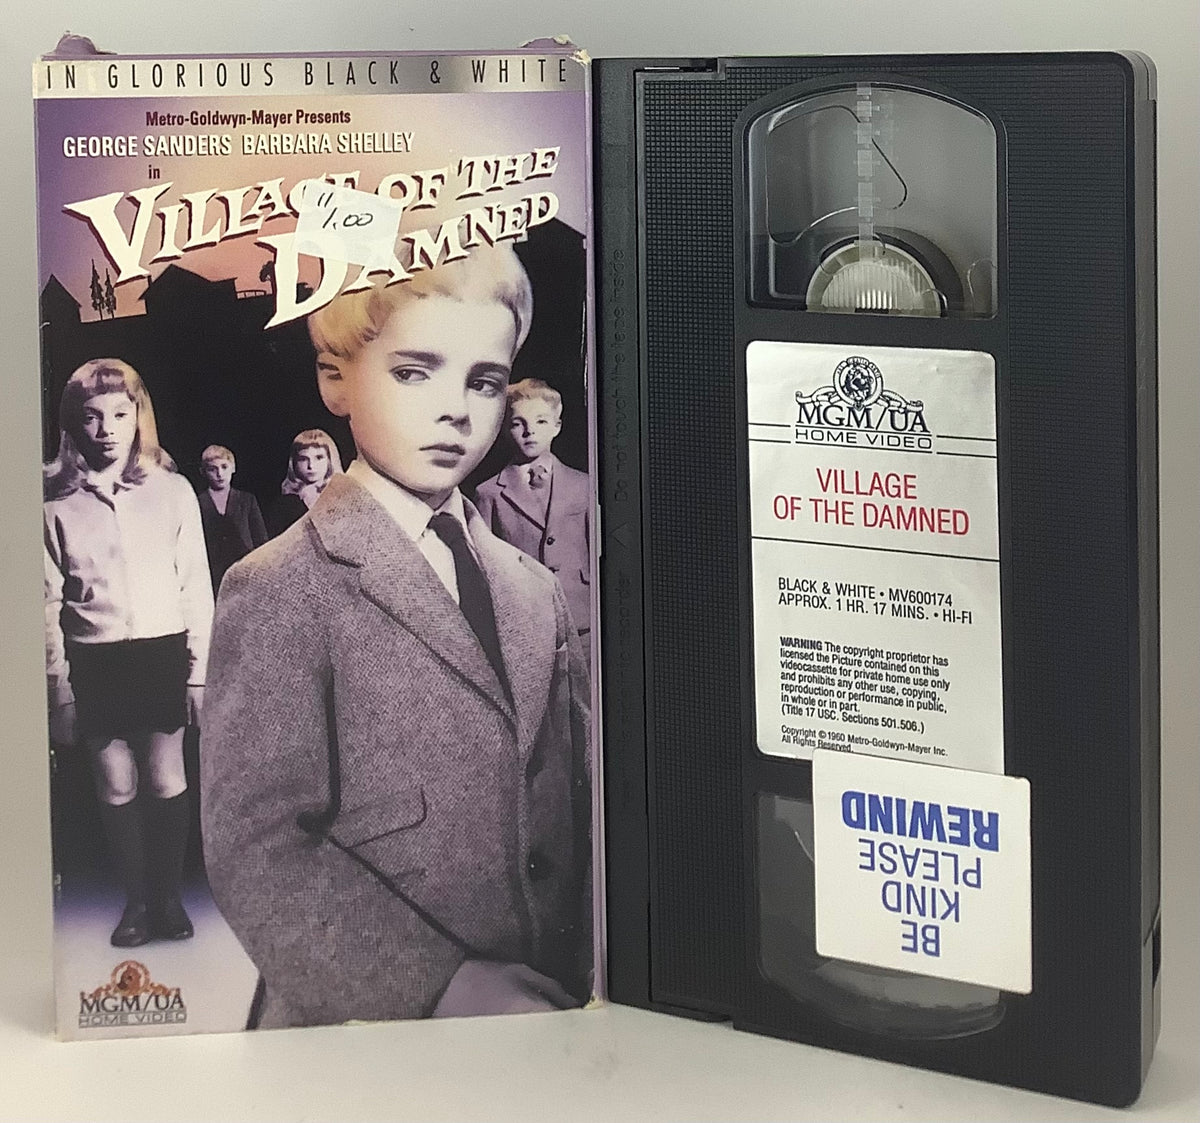 Village of the Damned (MGM/UA) VHS